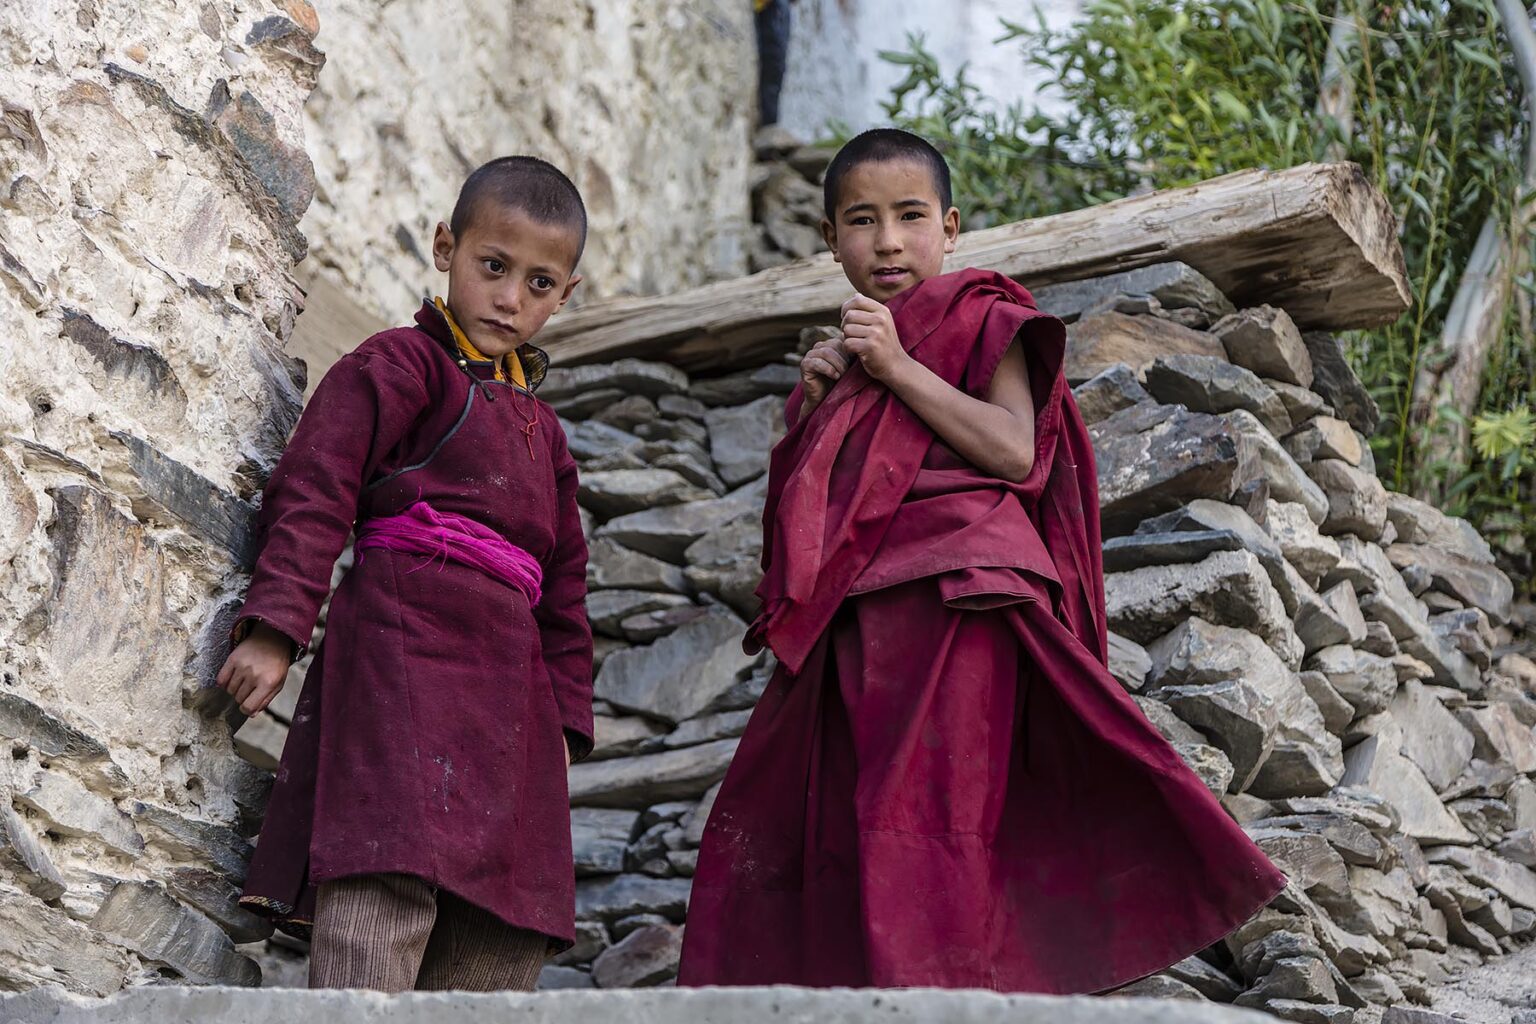 A young BUDDHIST MONKS at KARSHA GOMPA the largest Buddhist Monastery in the STOD RIVER VALLEY - ZANSKAR, LADAKH, INDIA